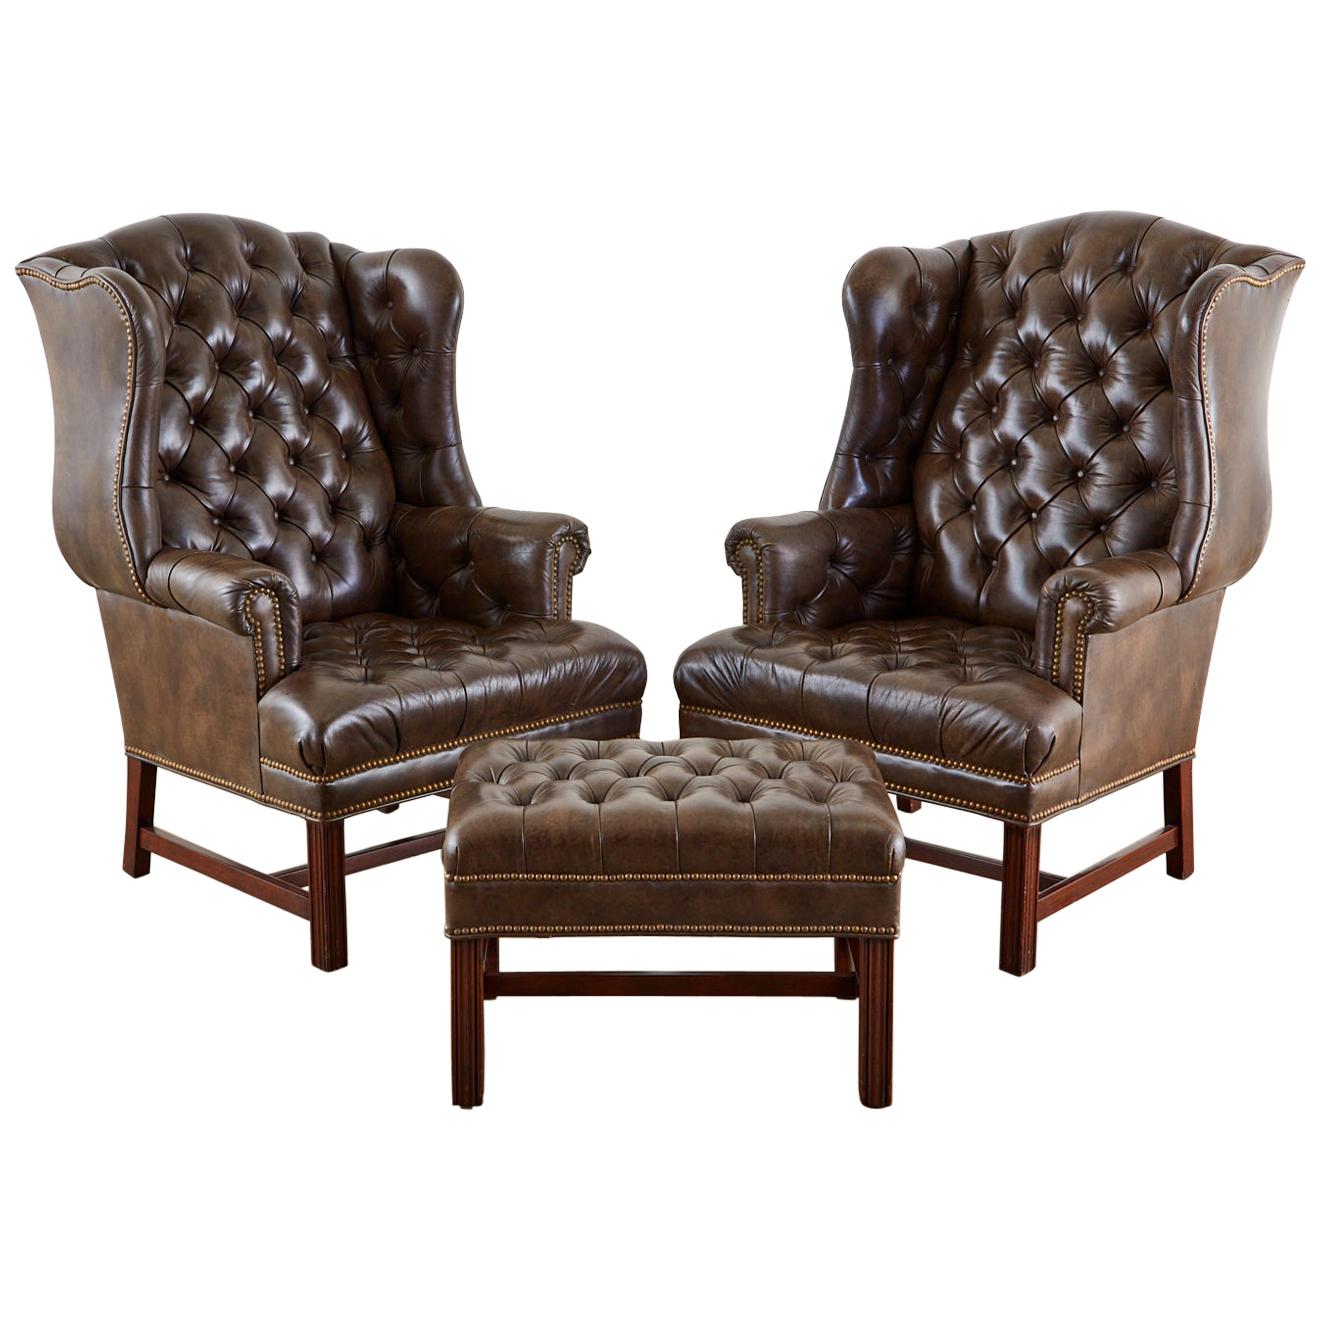 Pair of English Georgian Style Tufted Leather Wingbacks with Ottoman